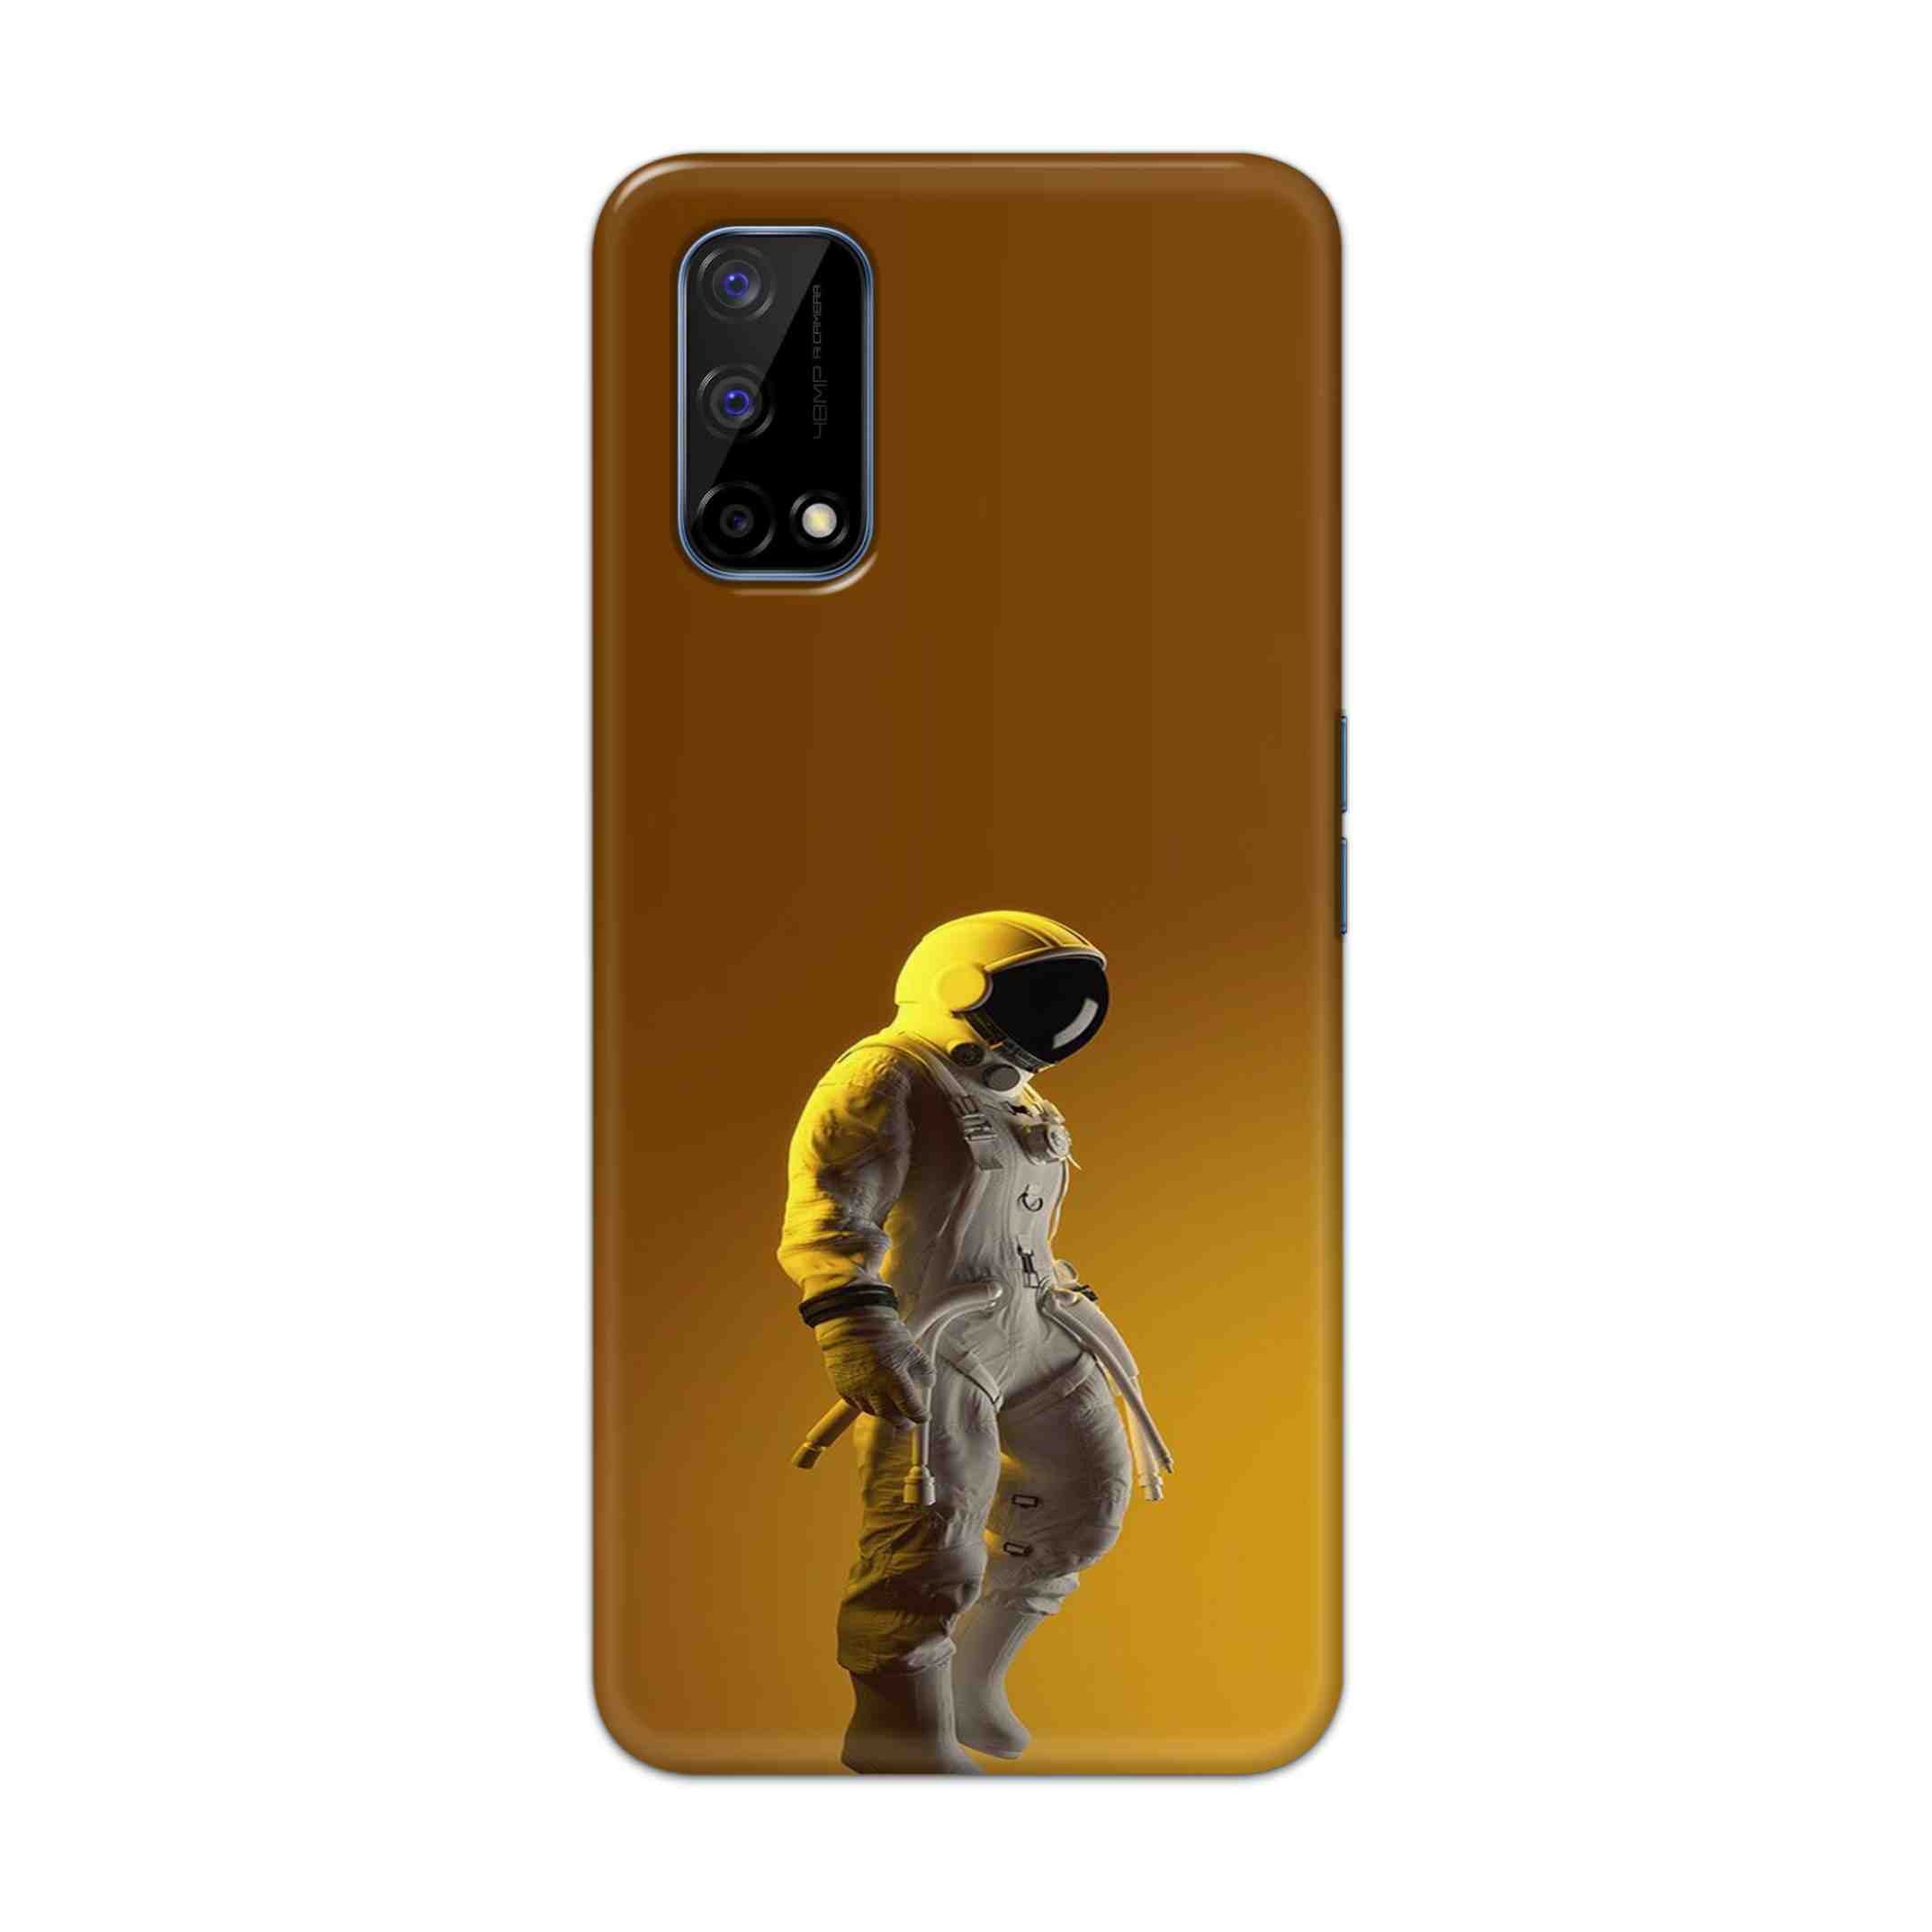 Buy Yellow Astronaut Hard Back Mobile Phone Case Cover For Realme Narzo 30 Pro Online